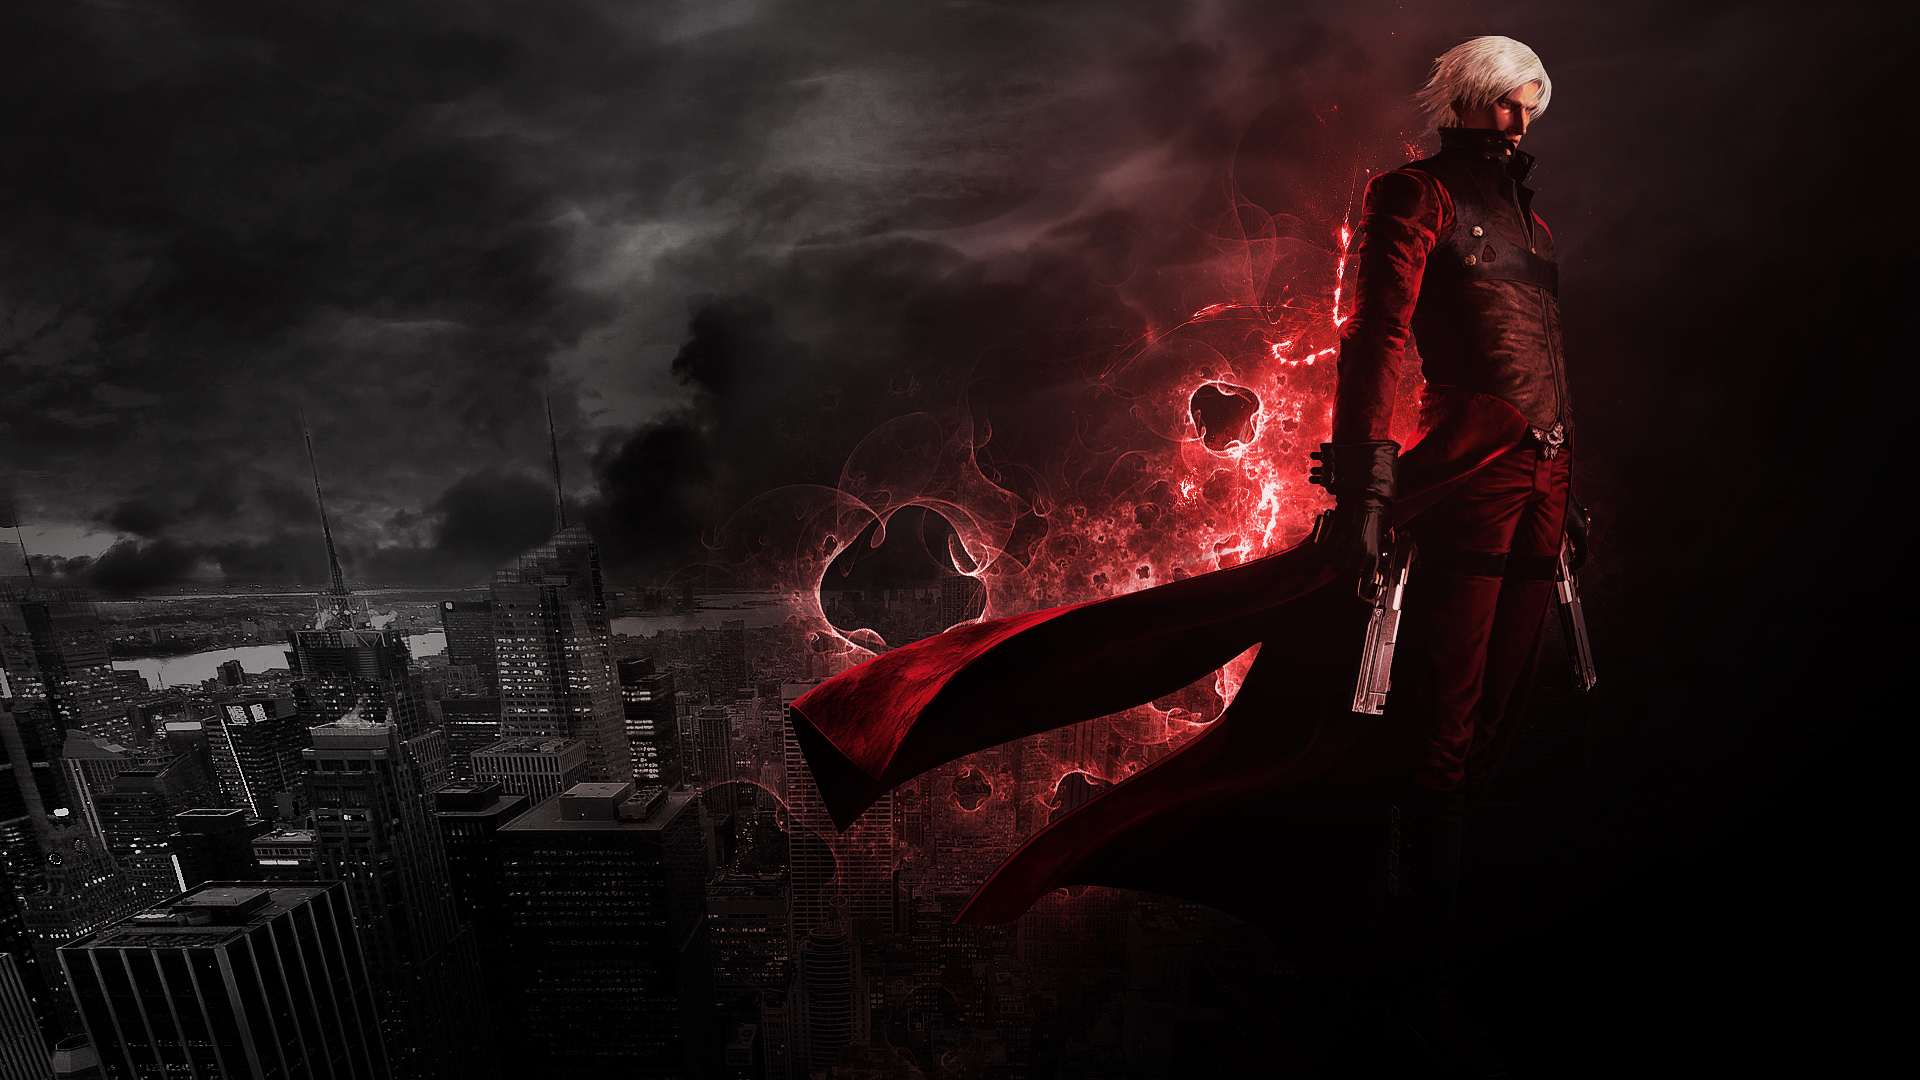 may cry dante wallpaper traumapolis devil may cry dante wallpapers 1920x1080